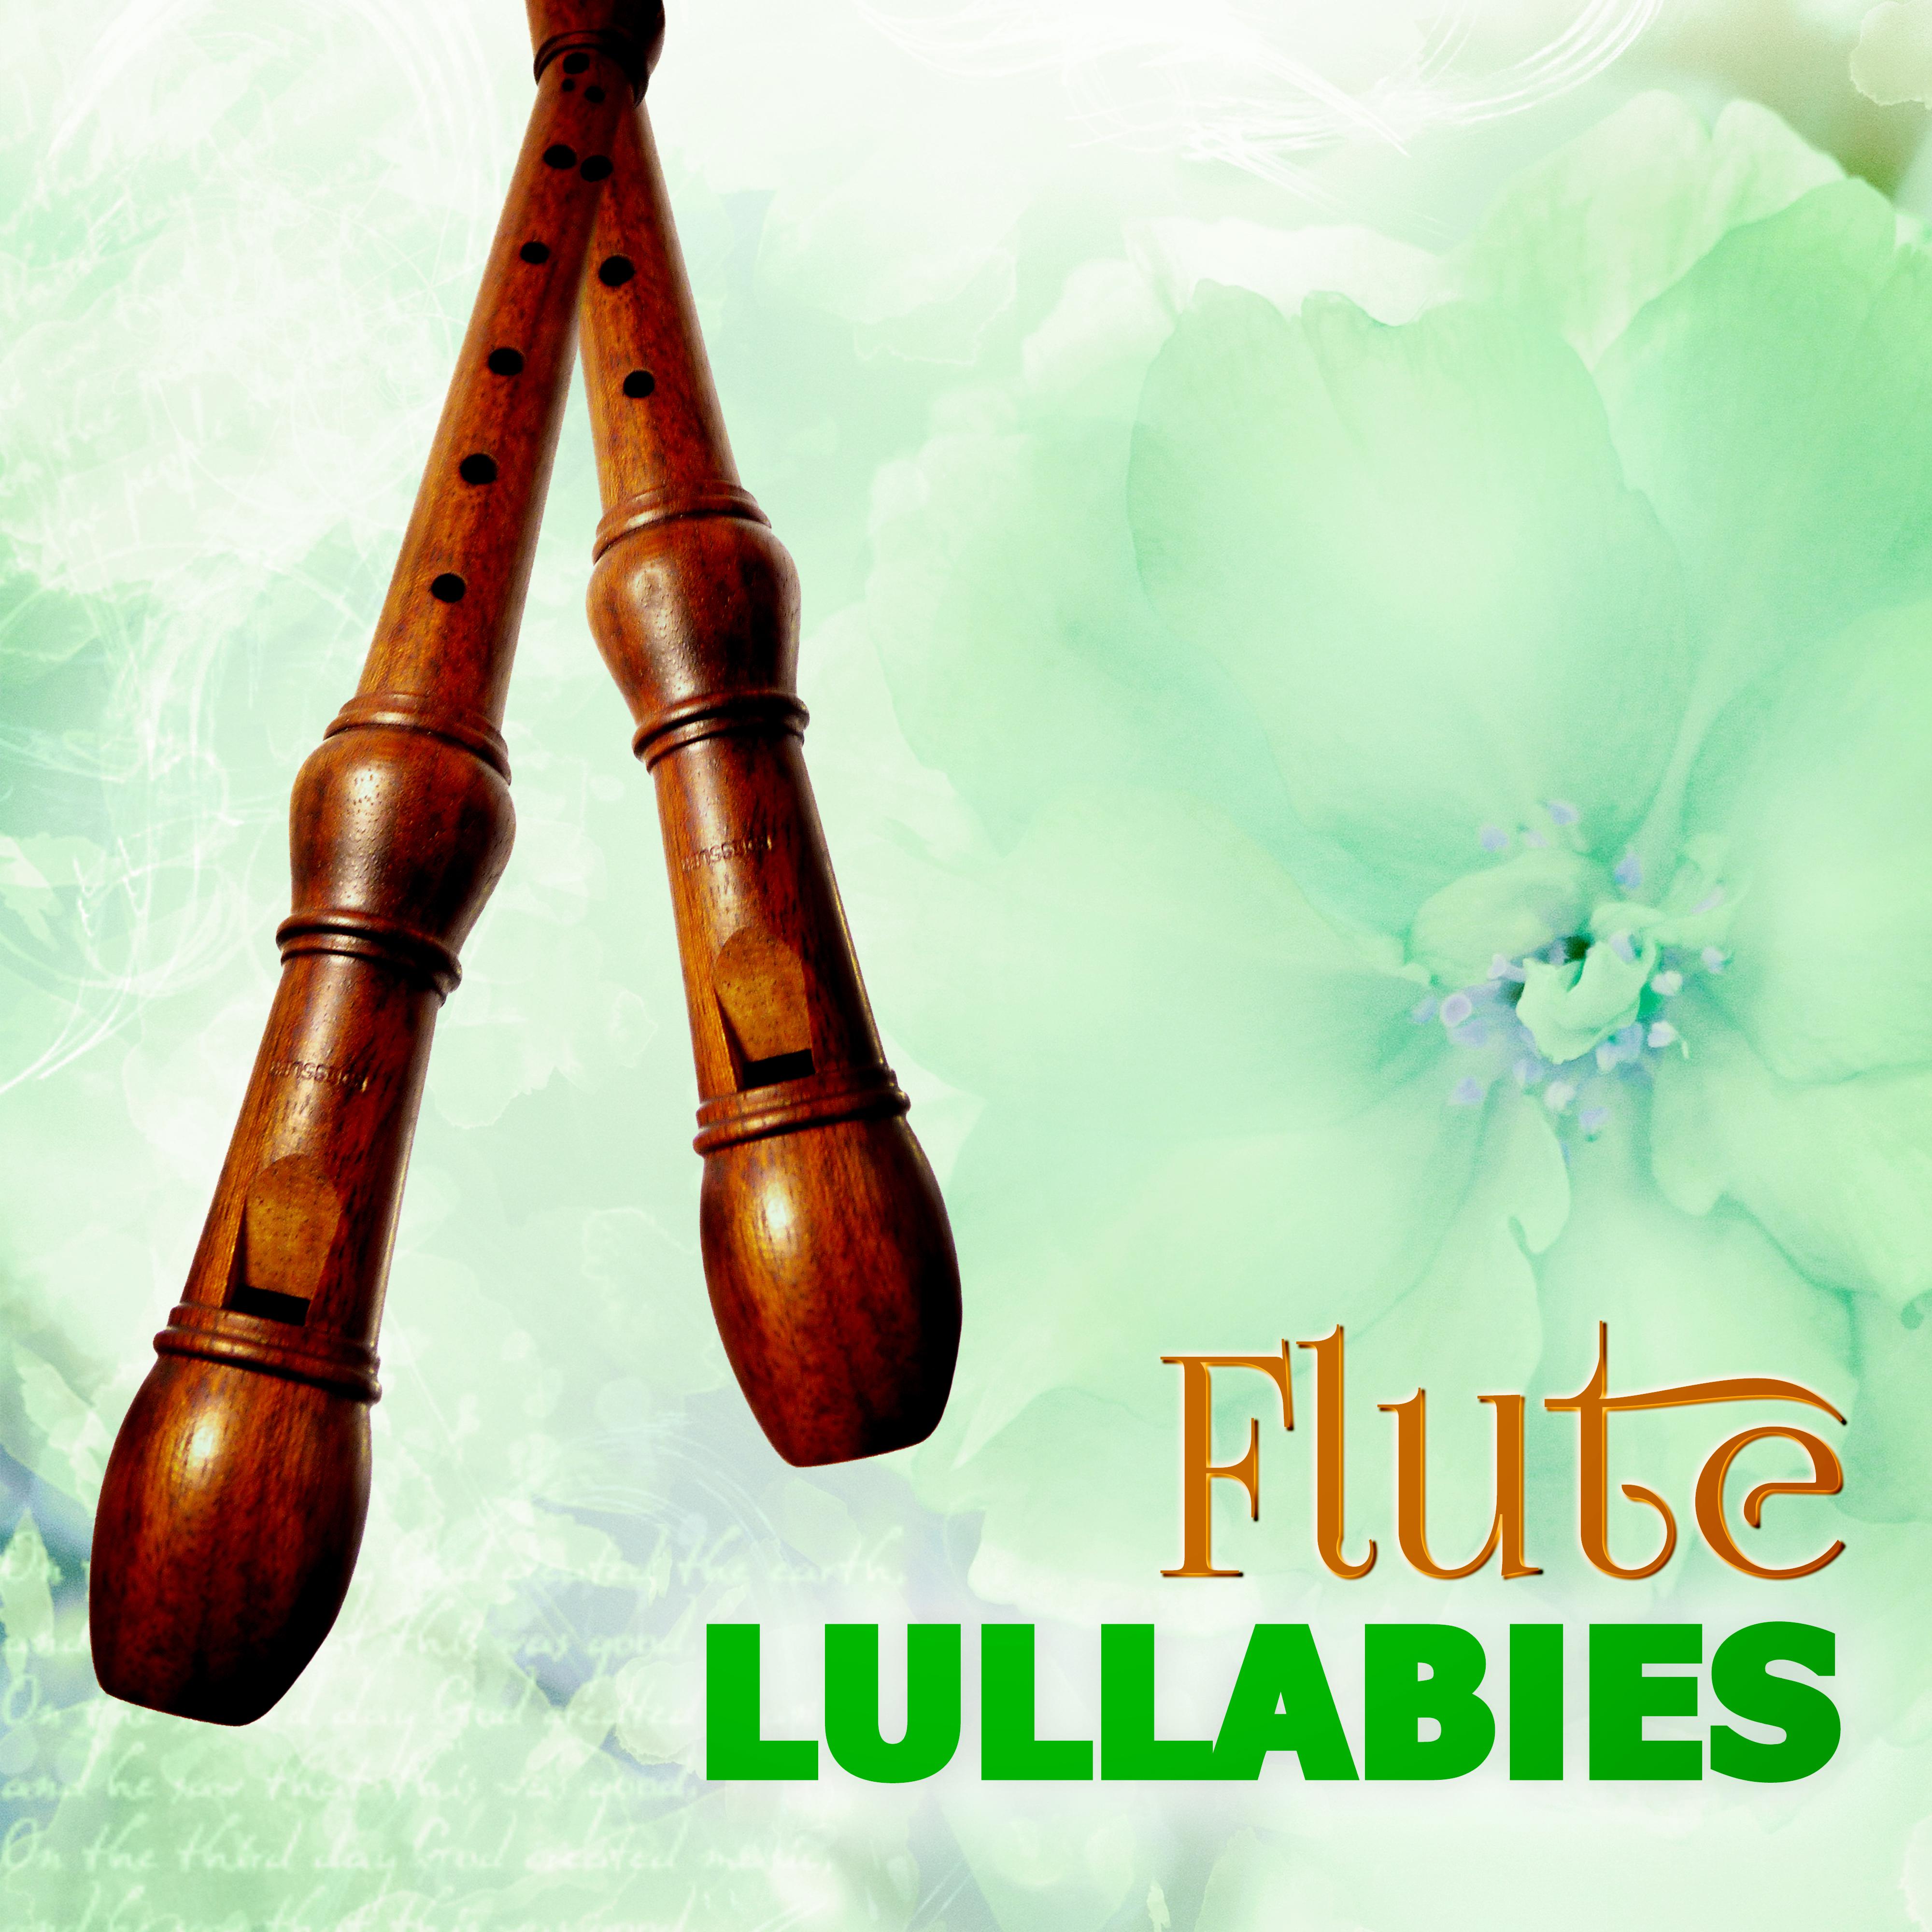 Flute Lullabies  Asian Flutes to Deep Sleep Hypnosis, Lucid Dreaming, Total Relaxation, Gentle Music for Babies, Sleep Therapy